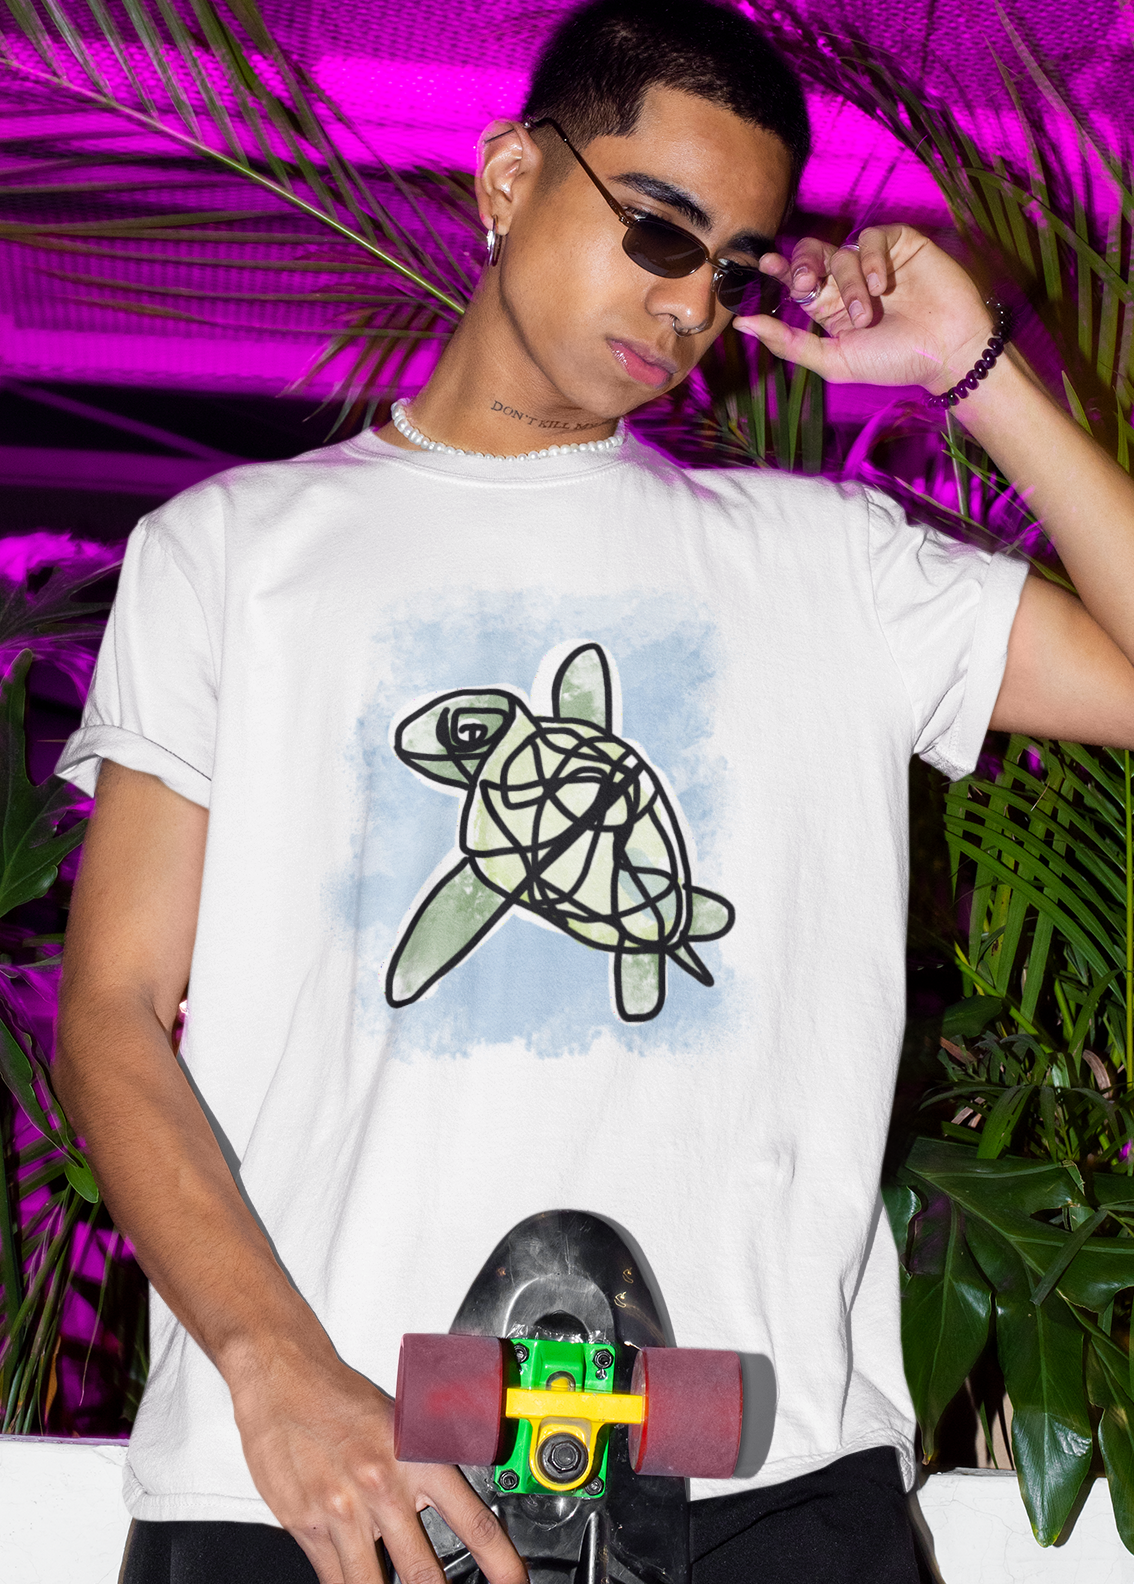 Sea Turtle T-shirt - Young man wearing an illustrated green sea turtle t-shirt by Hector and Bone